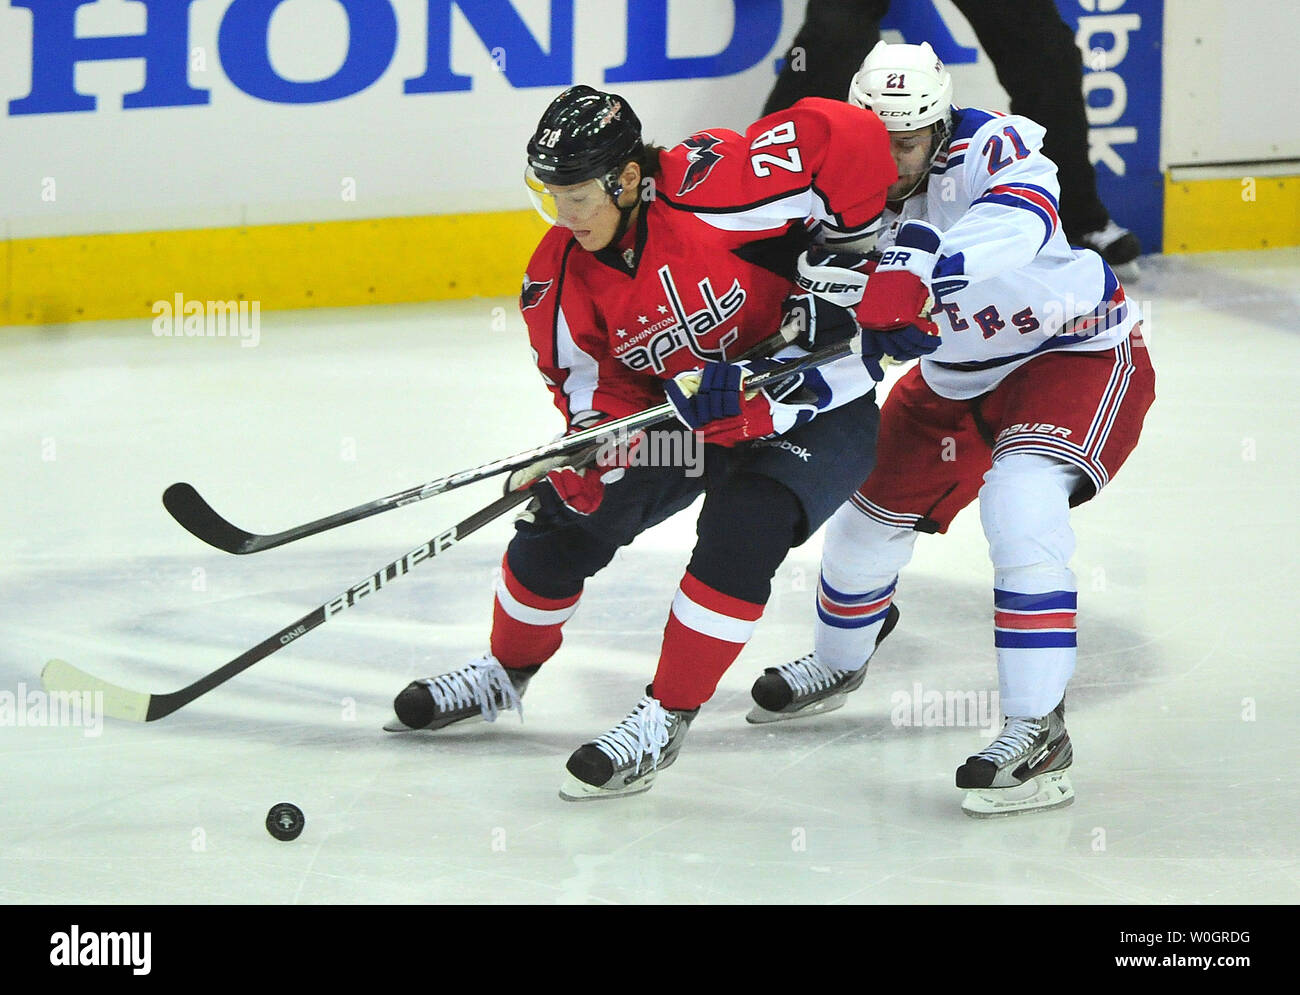 Washington Capitals' Alexander Semin fights for the puck with New York Rangers' Derek Stepan during period 1 of game 2 of the NHL Eastern Conference Semifinals at the Verizon Center in Washington, D.C. on May 2, 2012.  UPI/Kevin Dietsch Stock Photo